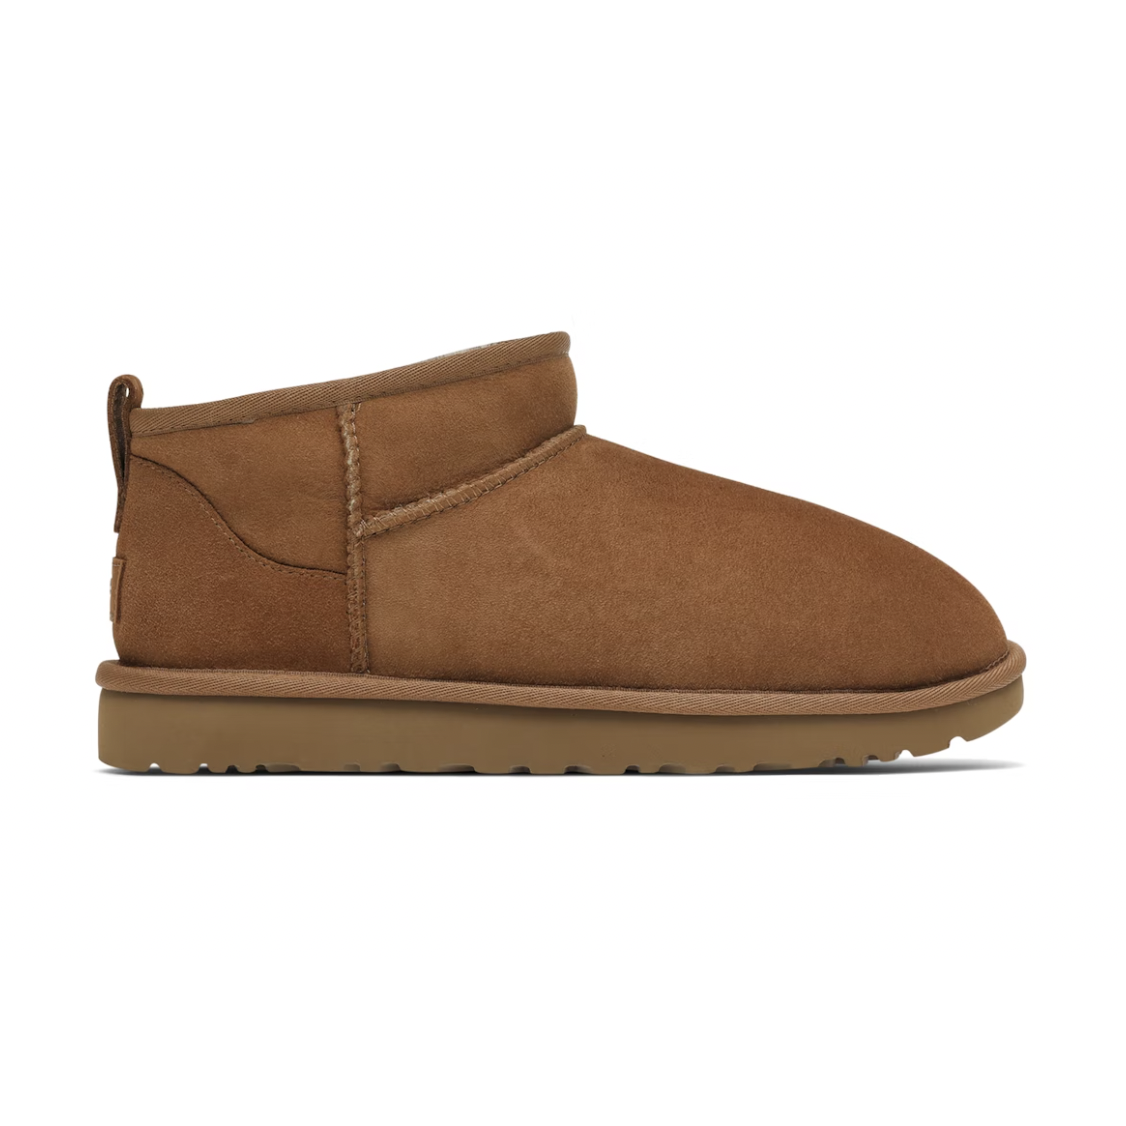 UGG CLASSIC ULTRA MINI BOOT CHESTNUT WOMENS by UGG from £109.00